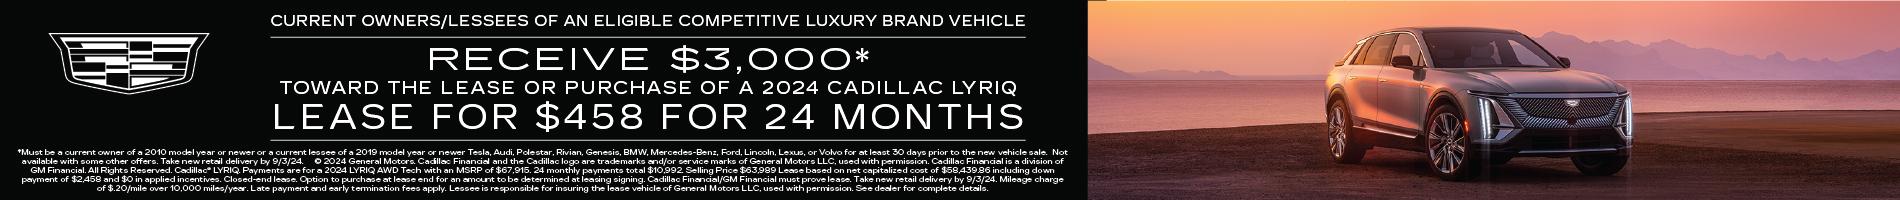 $458 for 24 Months 2024 Cadillac Lyric Lease Offer!